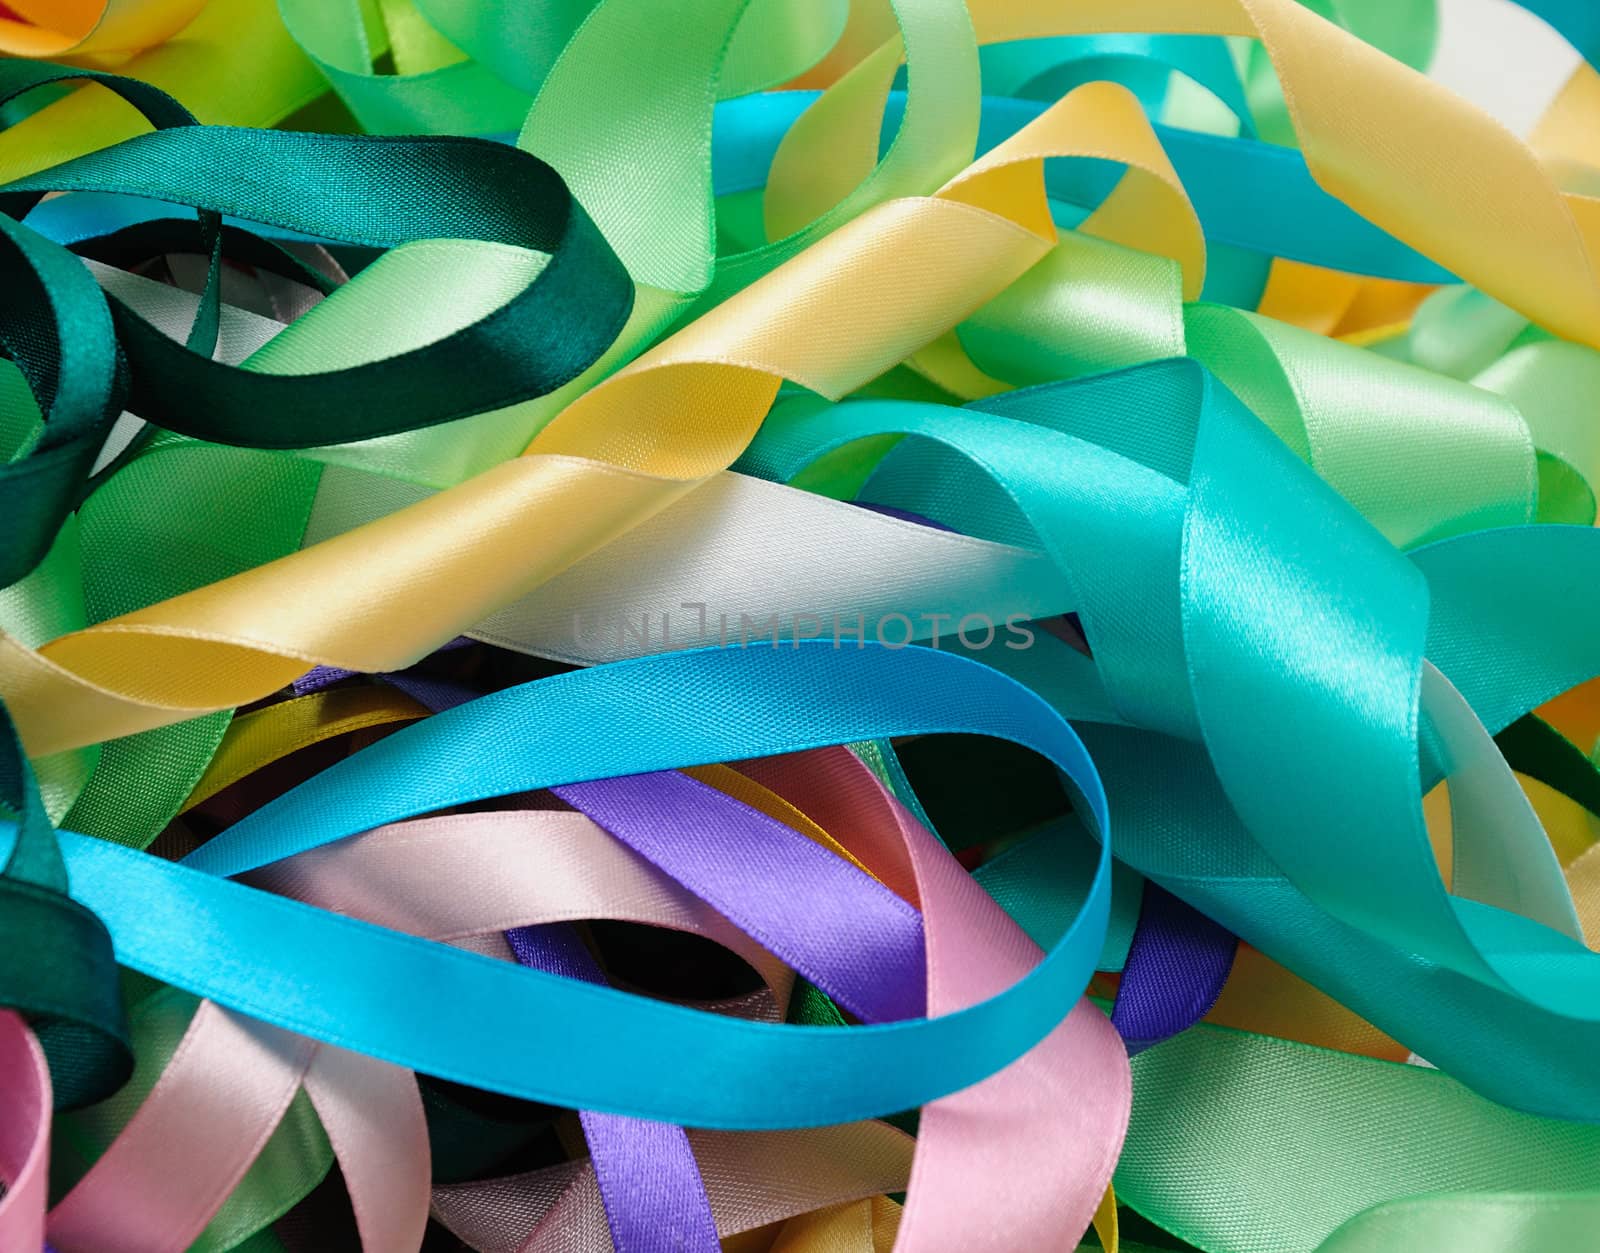 Multi-colored satin ribbons in a chaotic manner closeup

